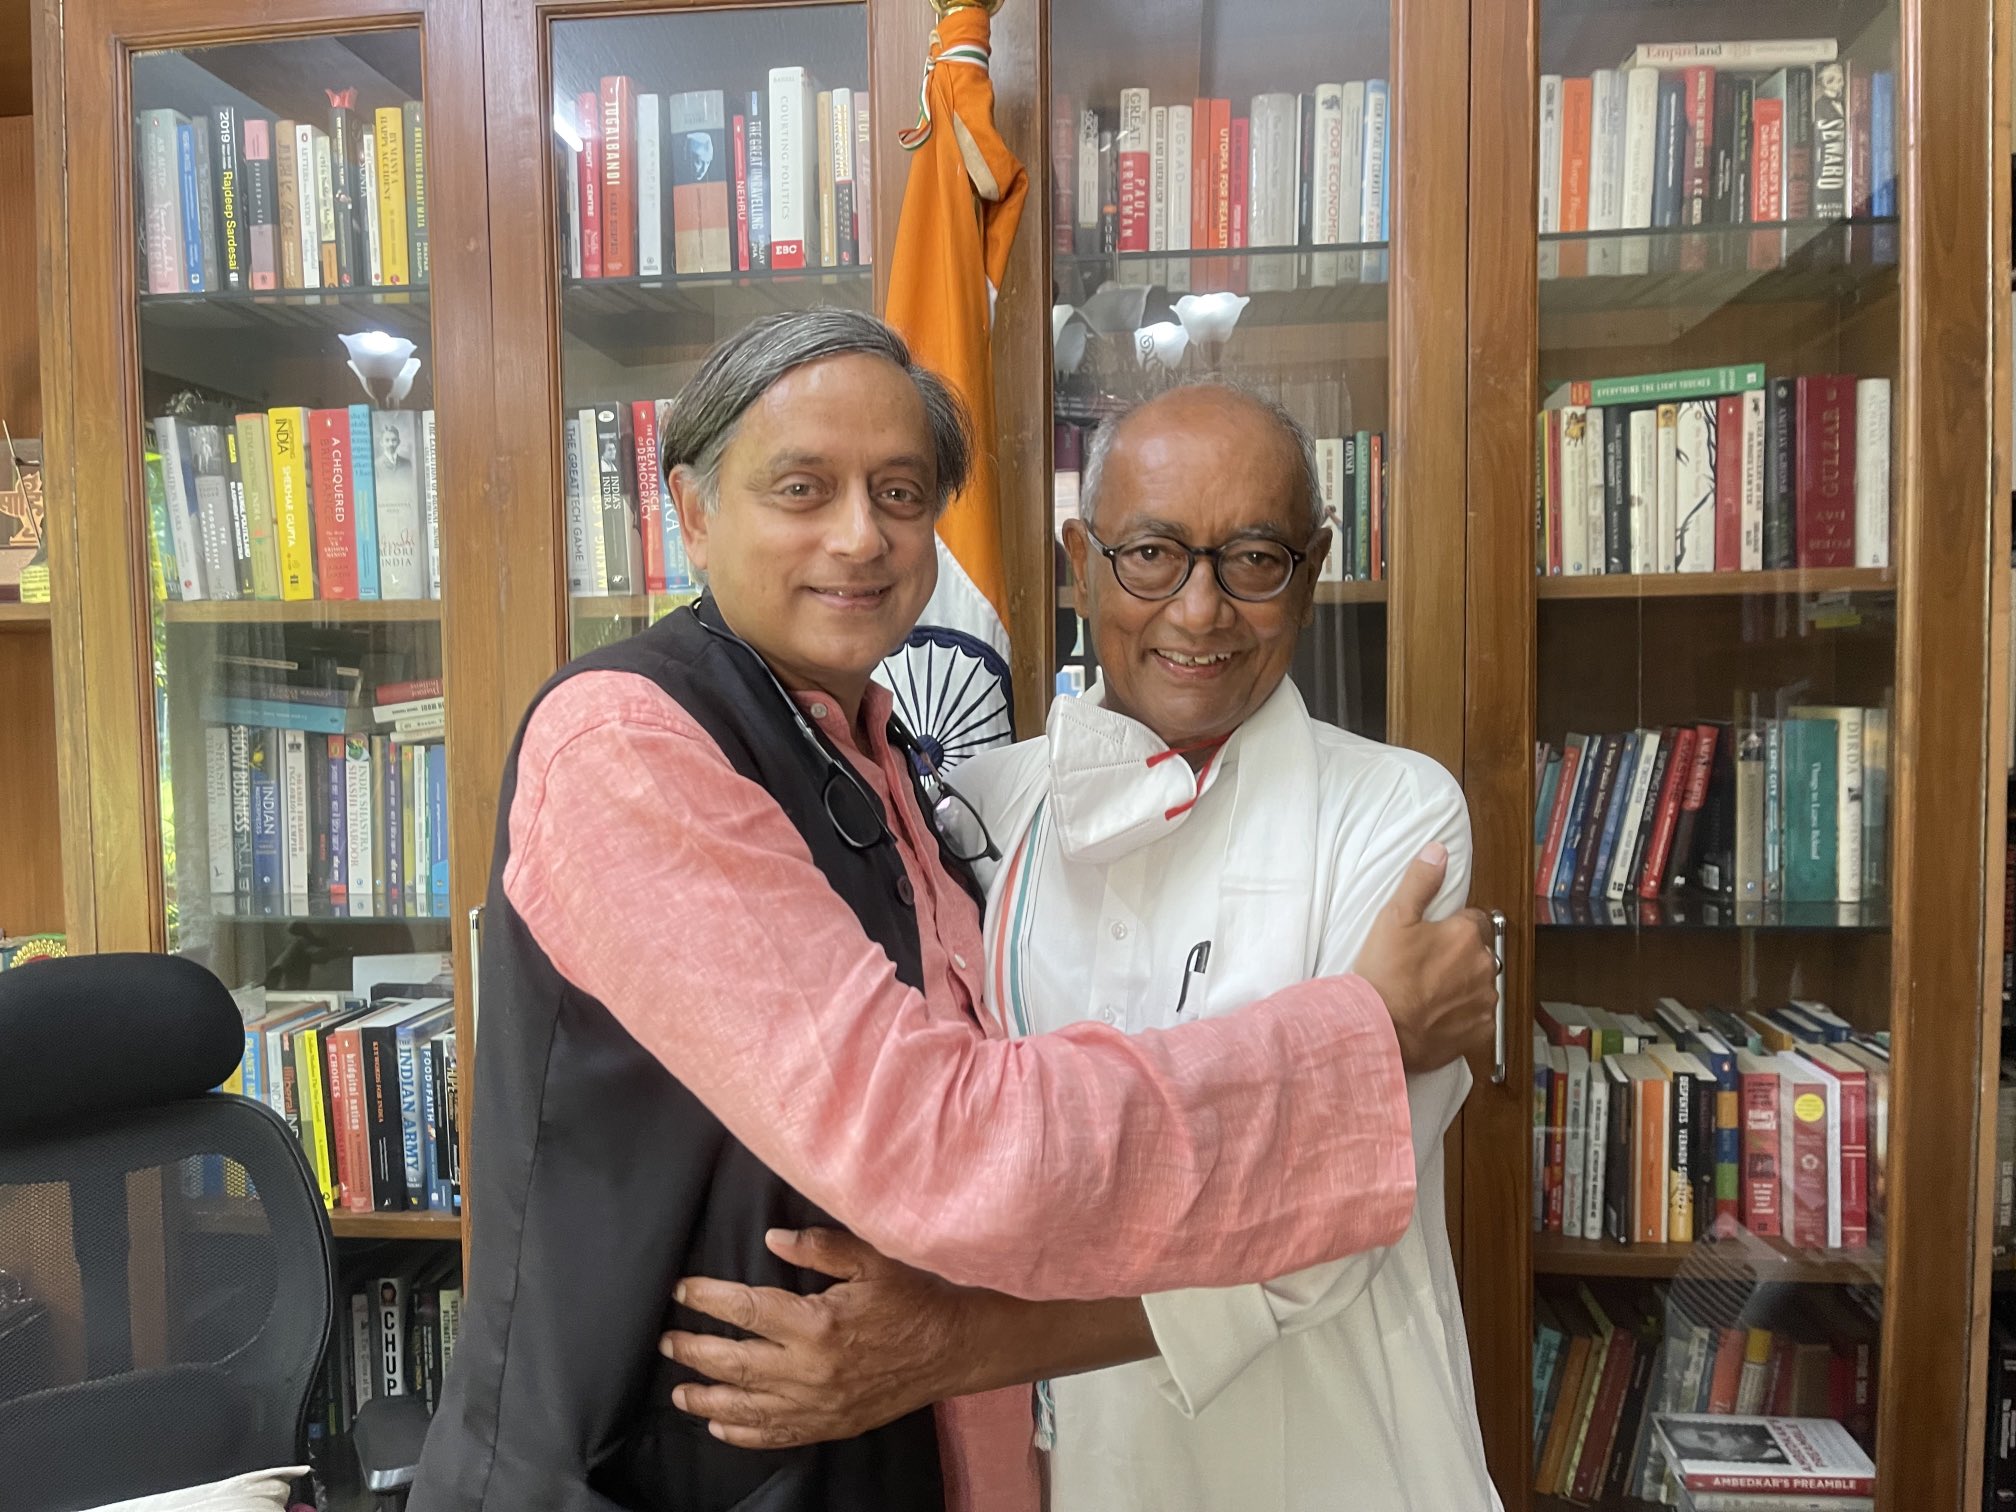 Ours 'friendly contest and not battle between rivals', says Tharoor after Digvijaya Singh meets him